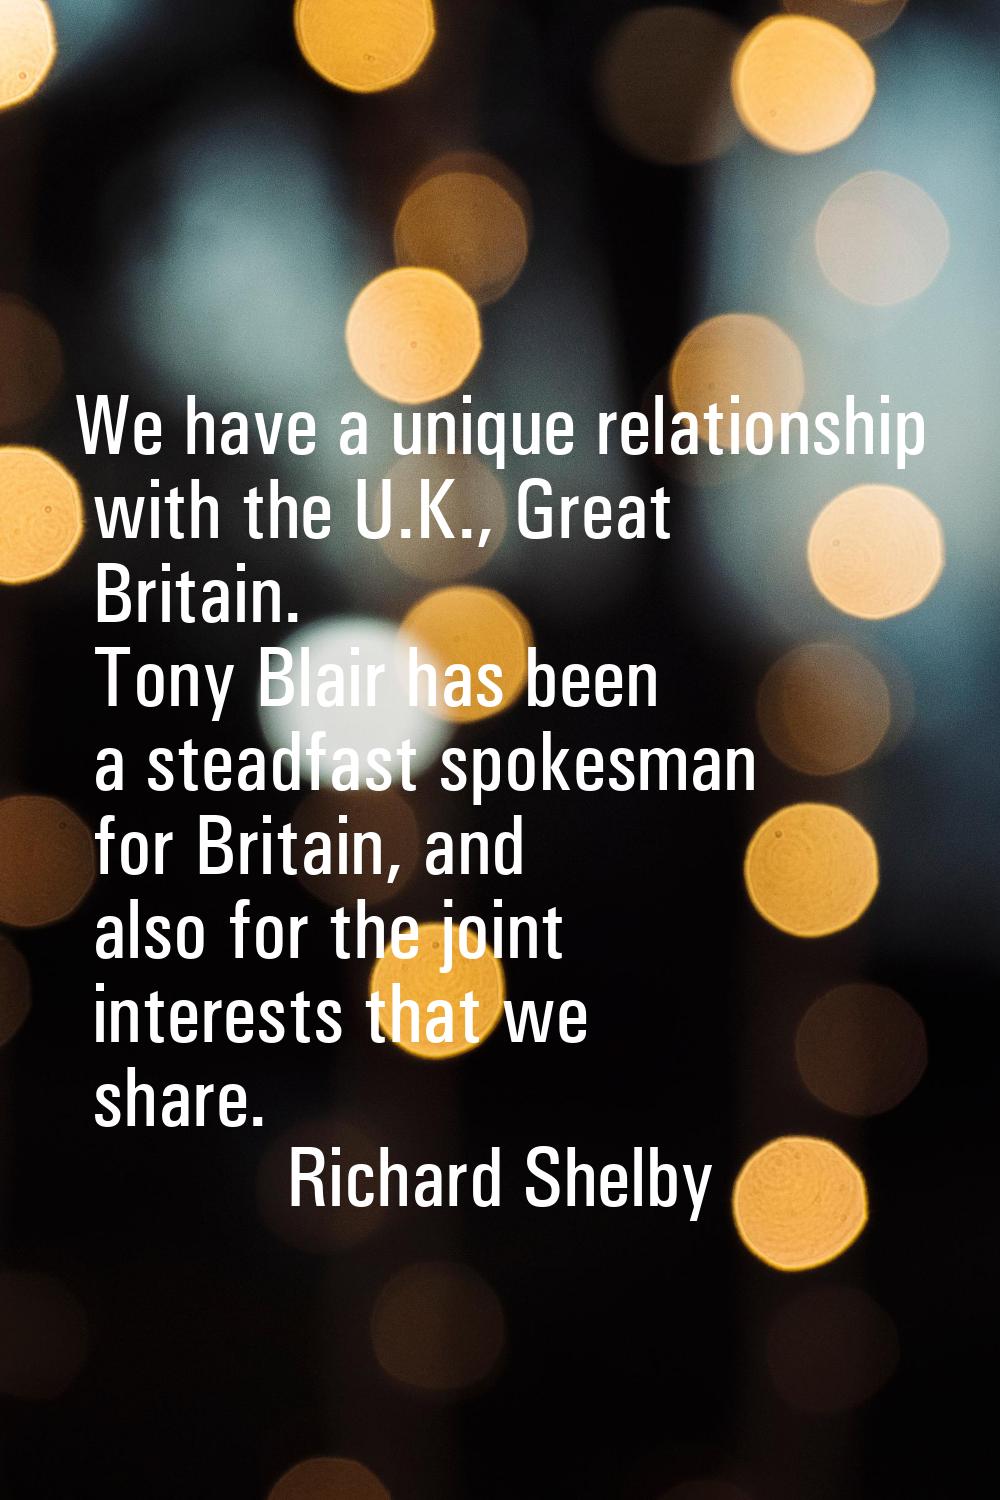 We have a unique relationship with the U.K., Great Britain. Tony Blair has been a steadfast spokesm